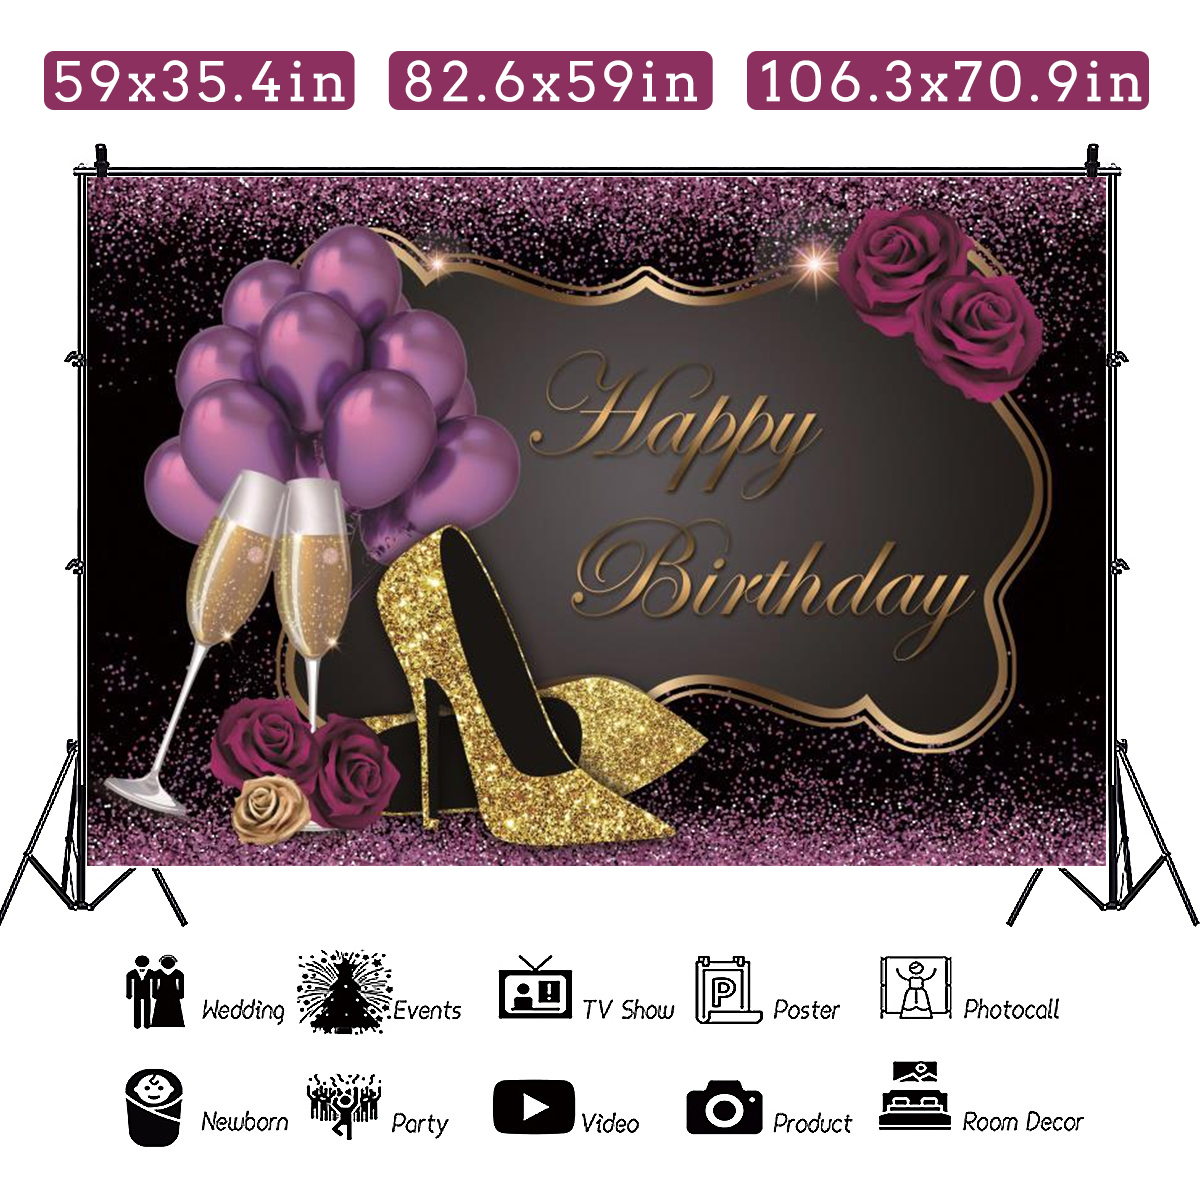 Happy-Birthday-Party-Photo-Photography-Backdrop-Cloth-Studio-Background-Home-Decoration-Props-1821314-2